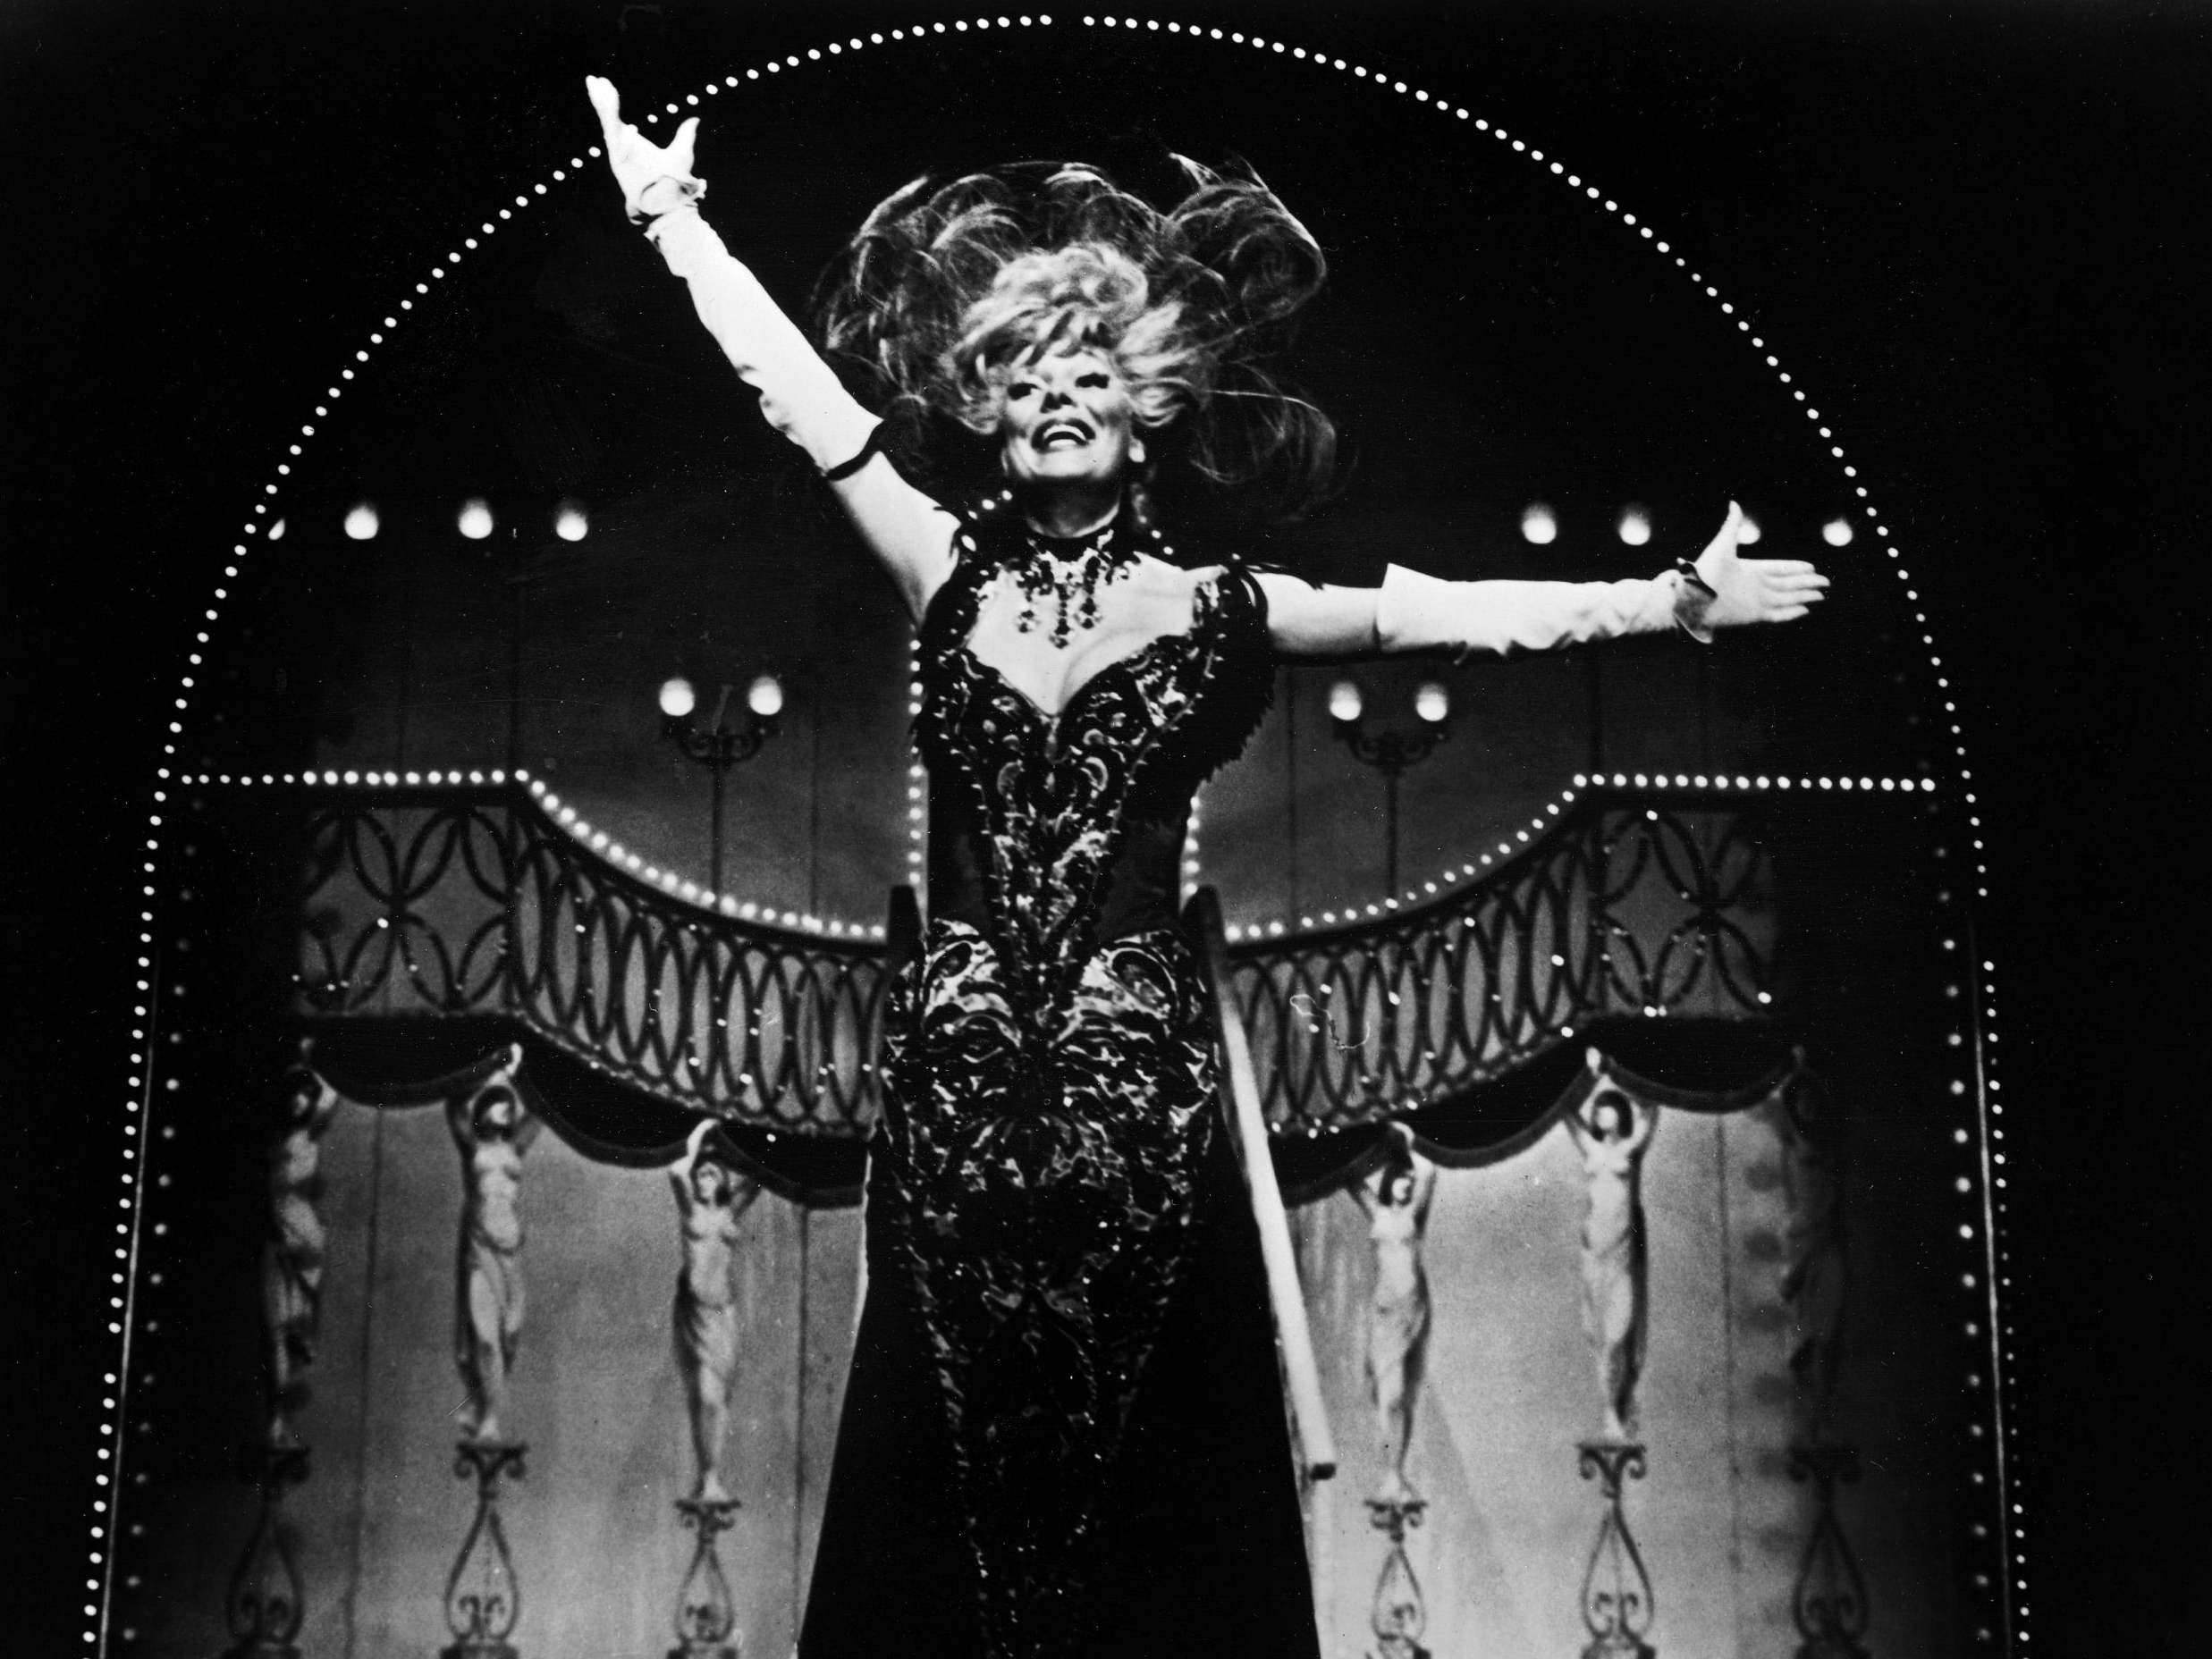 Carol Channing in the title role of Dolly Levi, taking a bow in the 1964 Broadway production